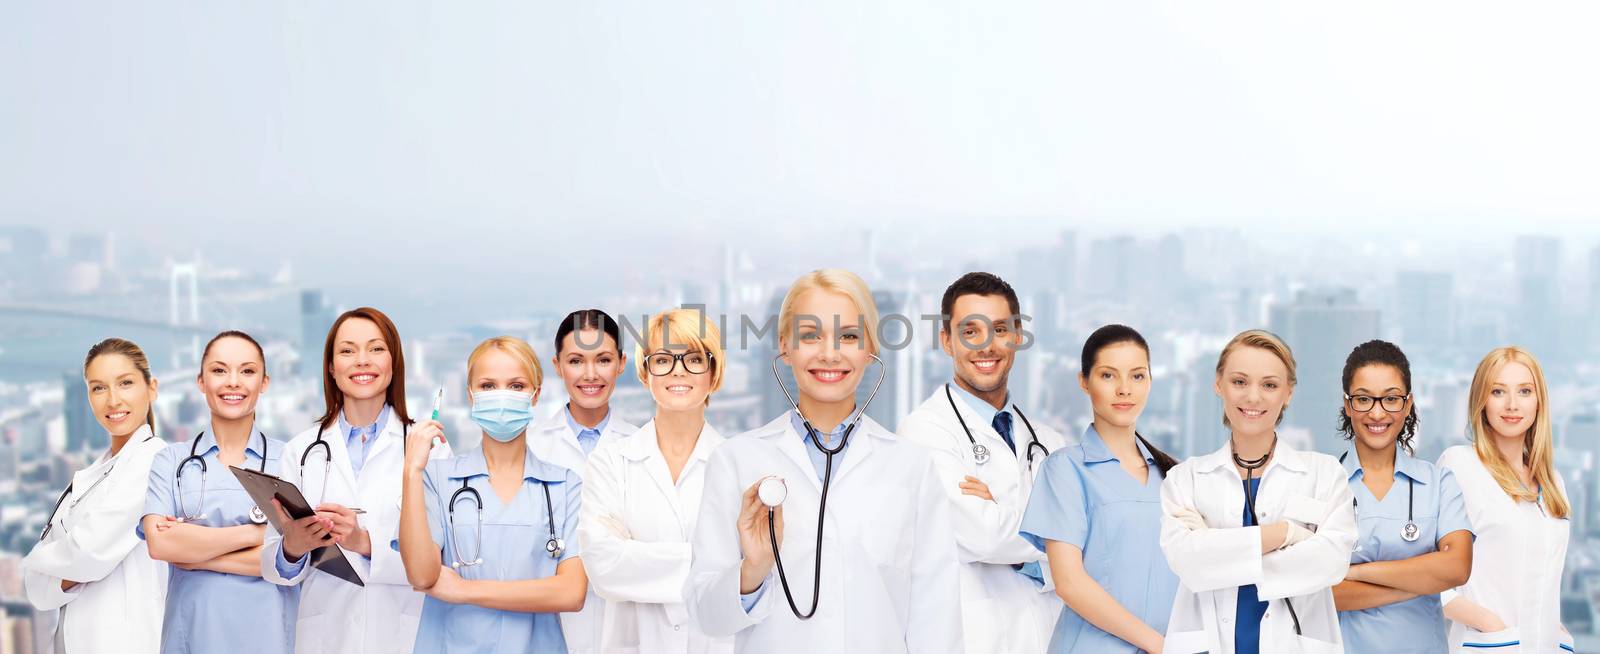 medicine and healthcare concept - team or group of female doctors and nurses